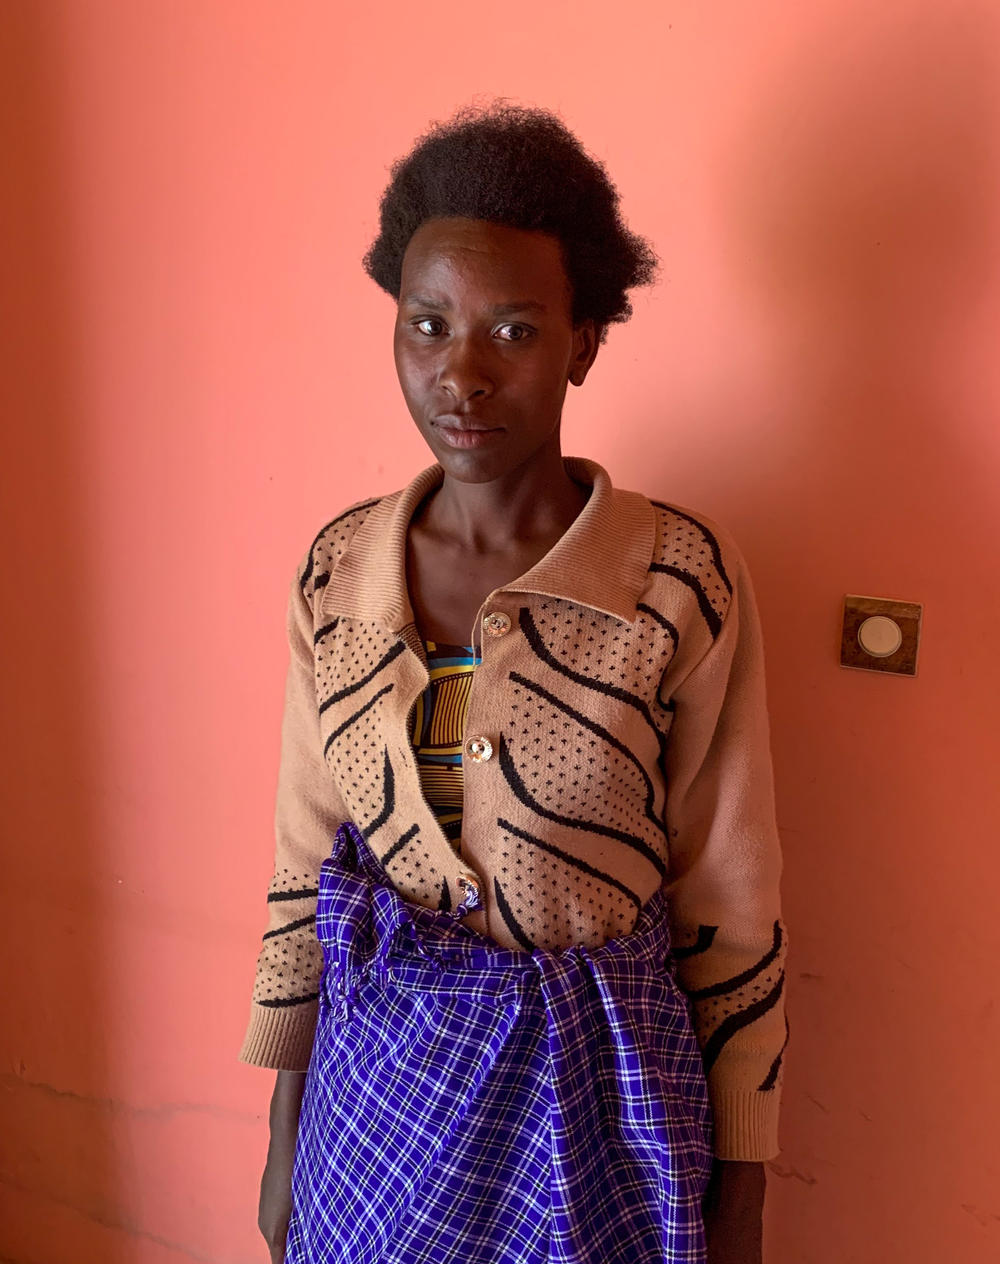 Nyiramahirwe Epiphanie, from northern Rwanda, says her father turned her into the police after he found out she had induced an abortion using a mixture of grasses several years ago. She says she was sentenced to 15 years in prison before she was pardoned in 2019.